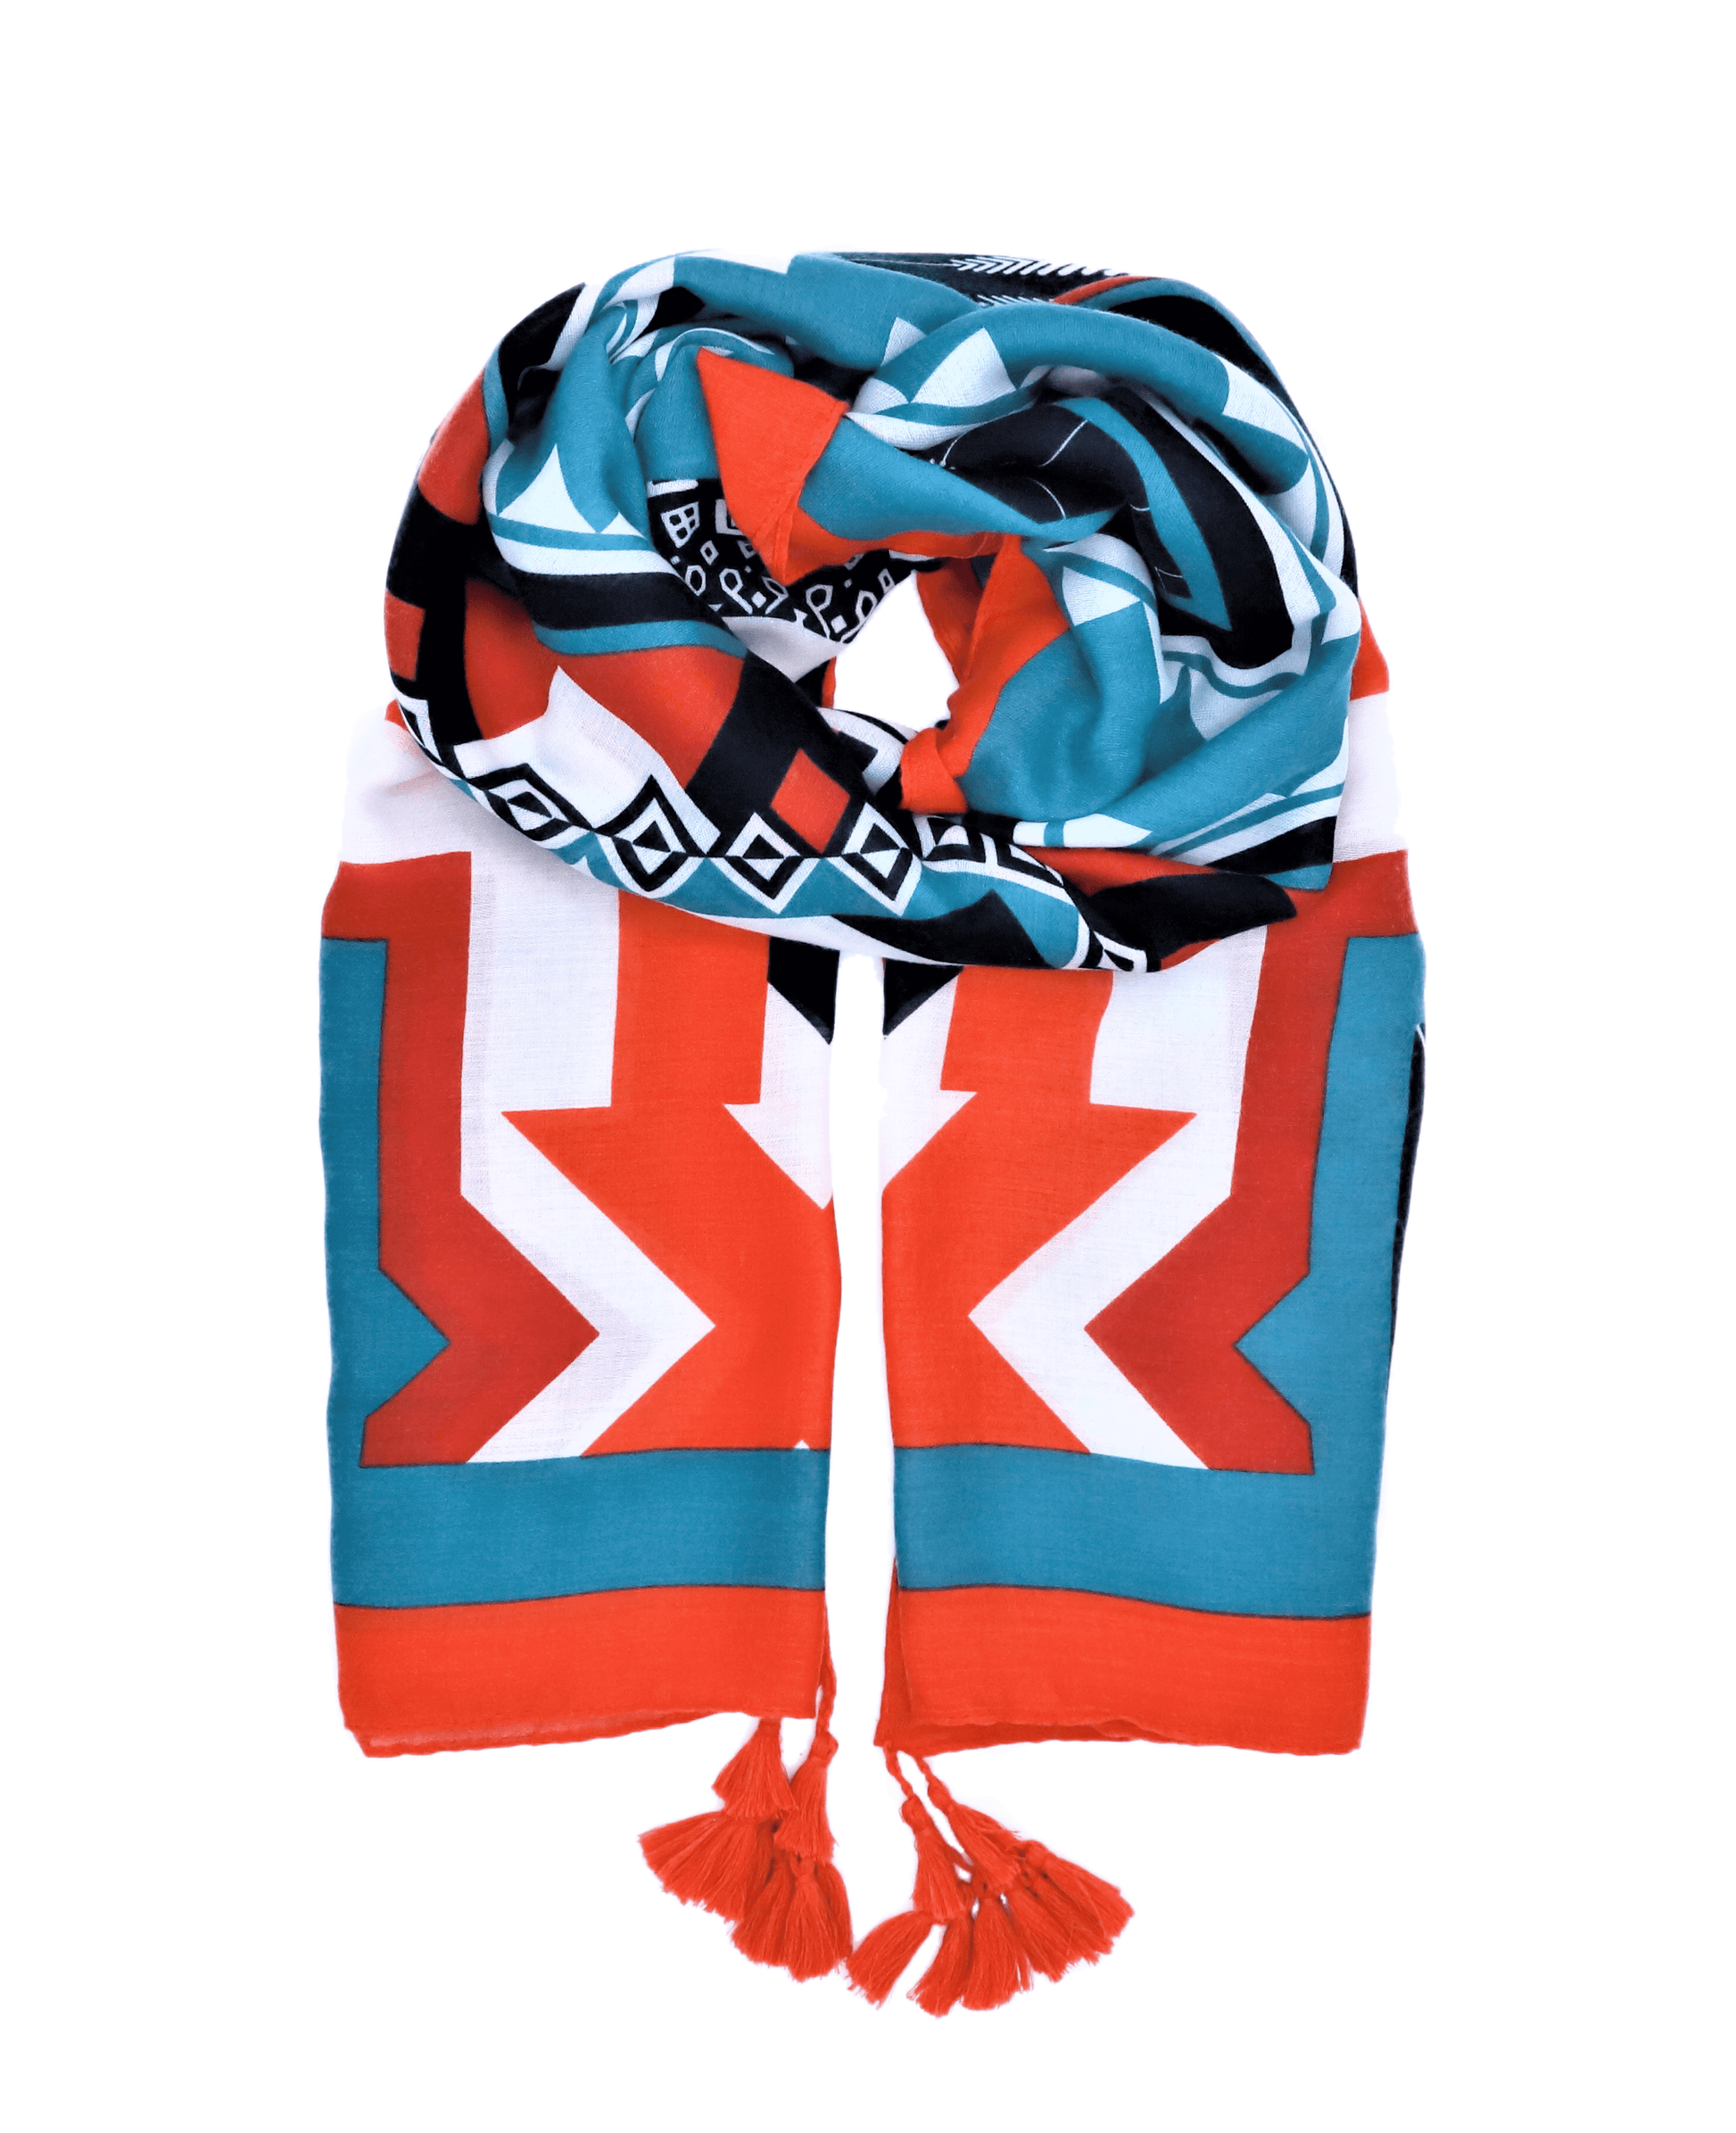 This is a soft XL-size viscose beach pareo and scarf for women with trendy tassels in modern geometric prints in black, turquoise and red to give you a happy, fresh and modern look. This is a sustainable and vegan PETA certified pareo made from sustainably sourced viscose. This versatile pareo can be used as a skirt, dress, scarf or shawl.